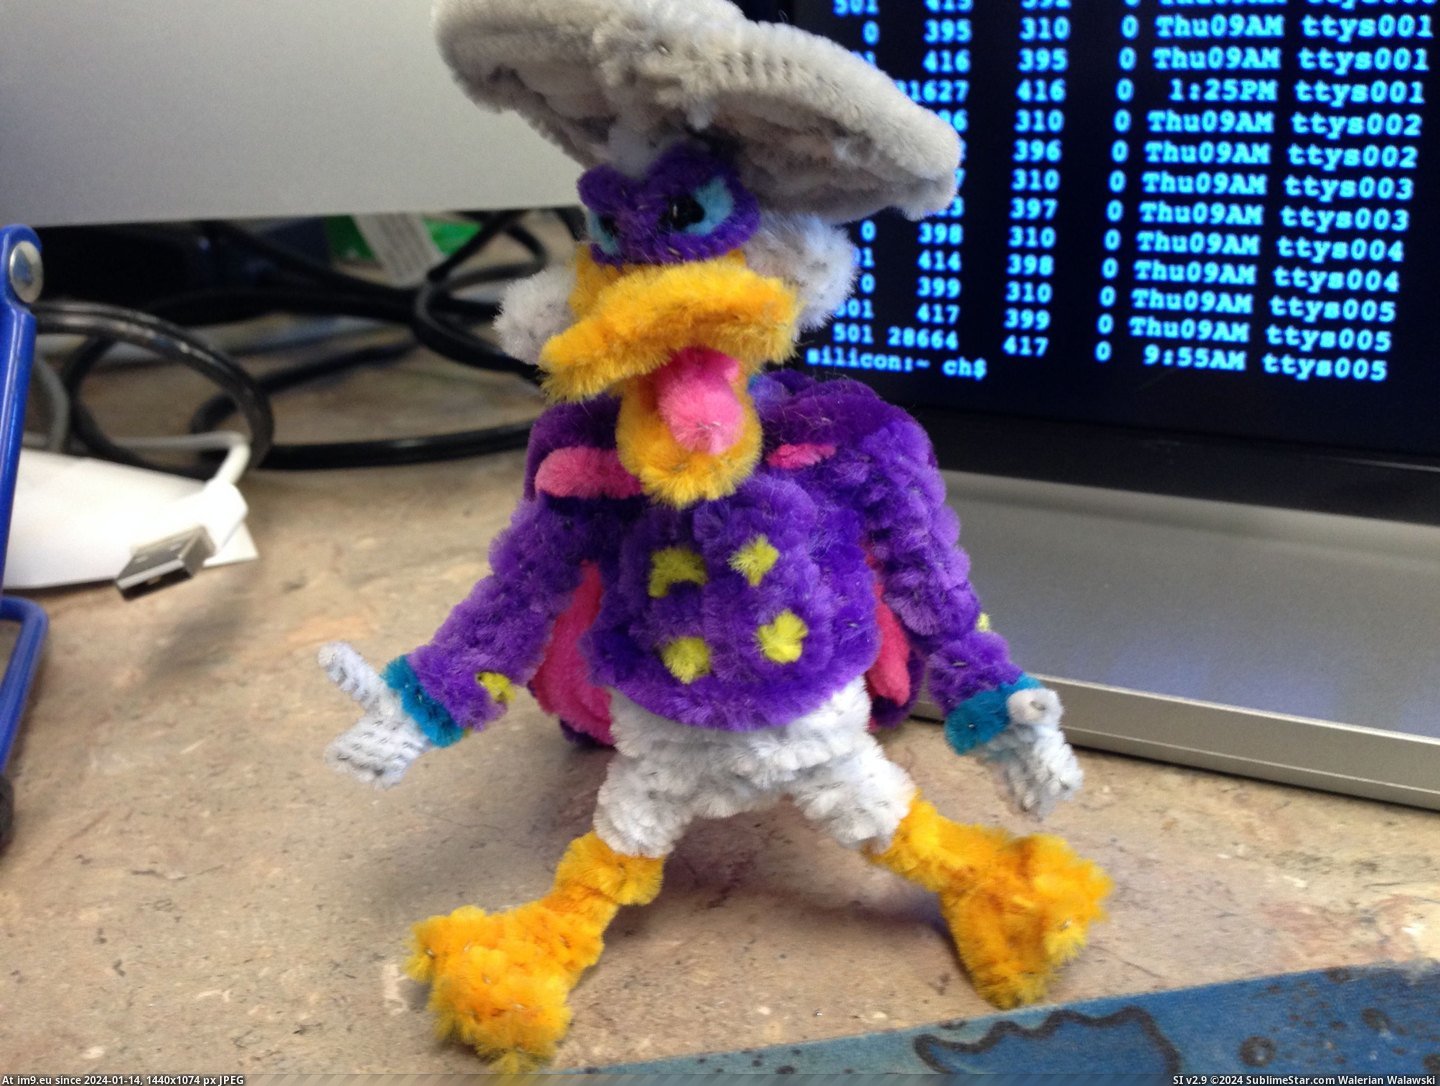 #State #Alaska #Duck #Cleaners #Darkwing #Created #Pipe #Fair [Pics] Darkwing Duck created entirely with pipe cleaners. Found at the Alaska State Fair. Pic. (Obraz z album My r/PICS favs))